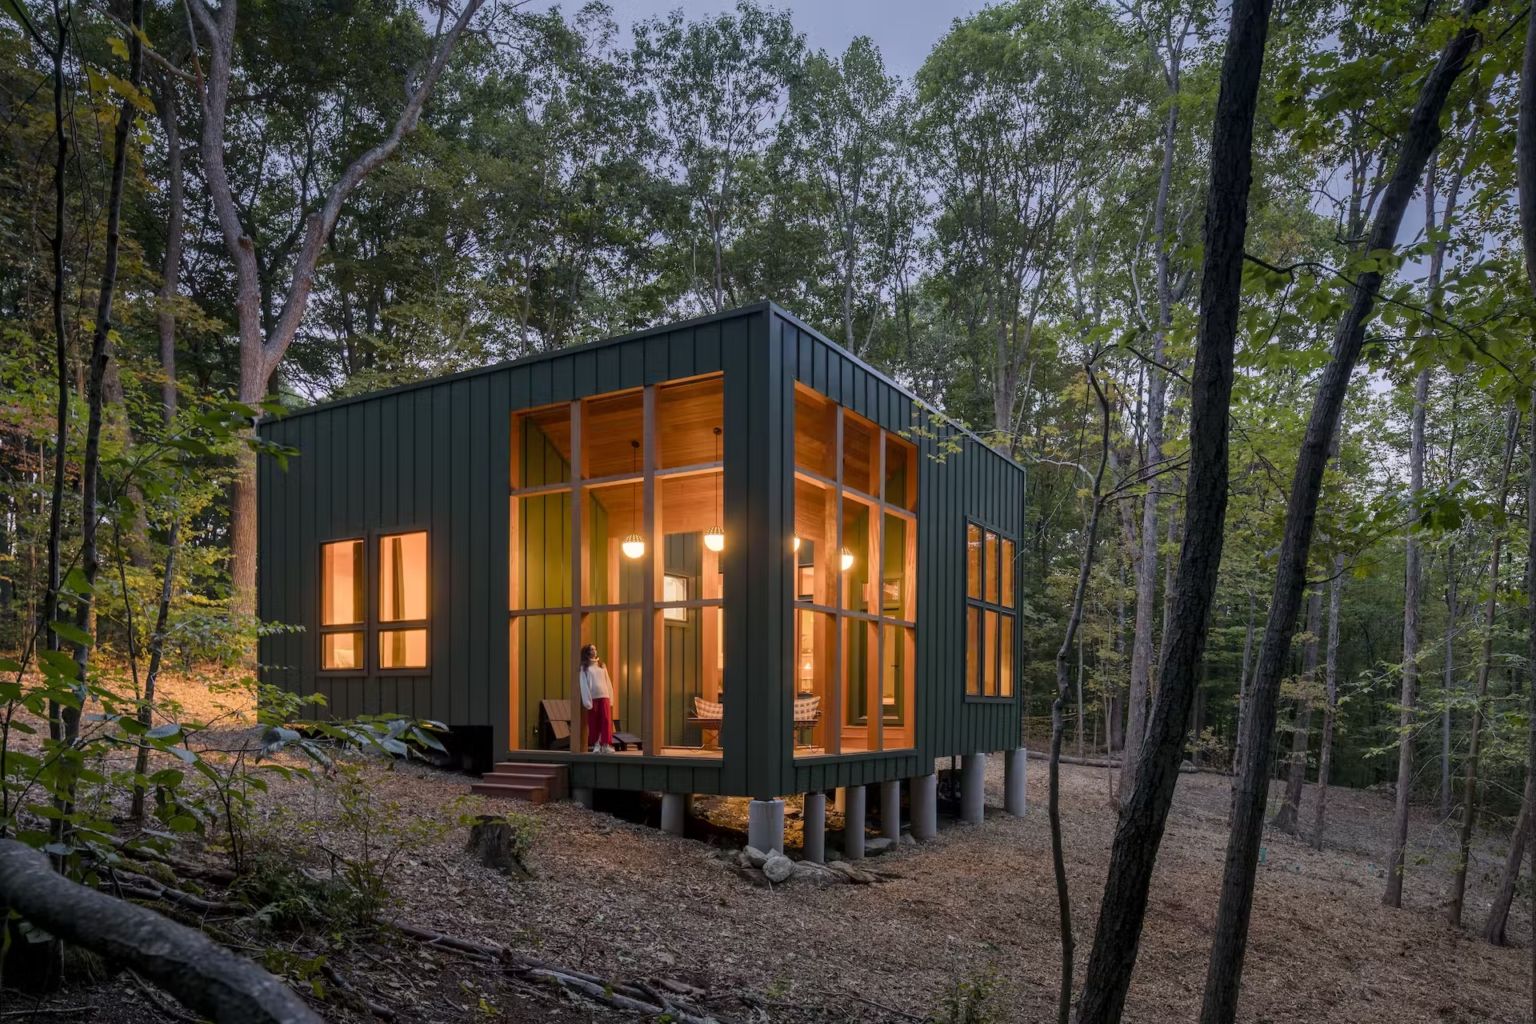 A Metal-Clad Cabin Hovers Above the Forest Floor in Connecticut